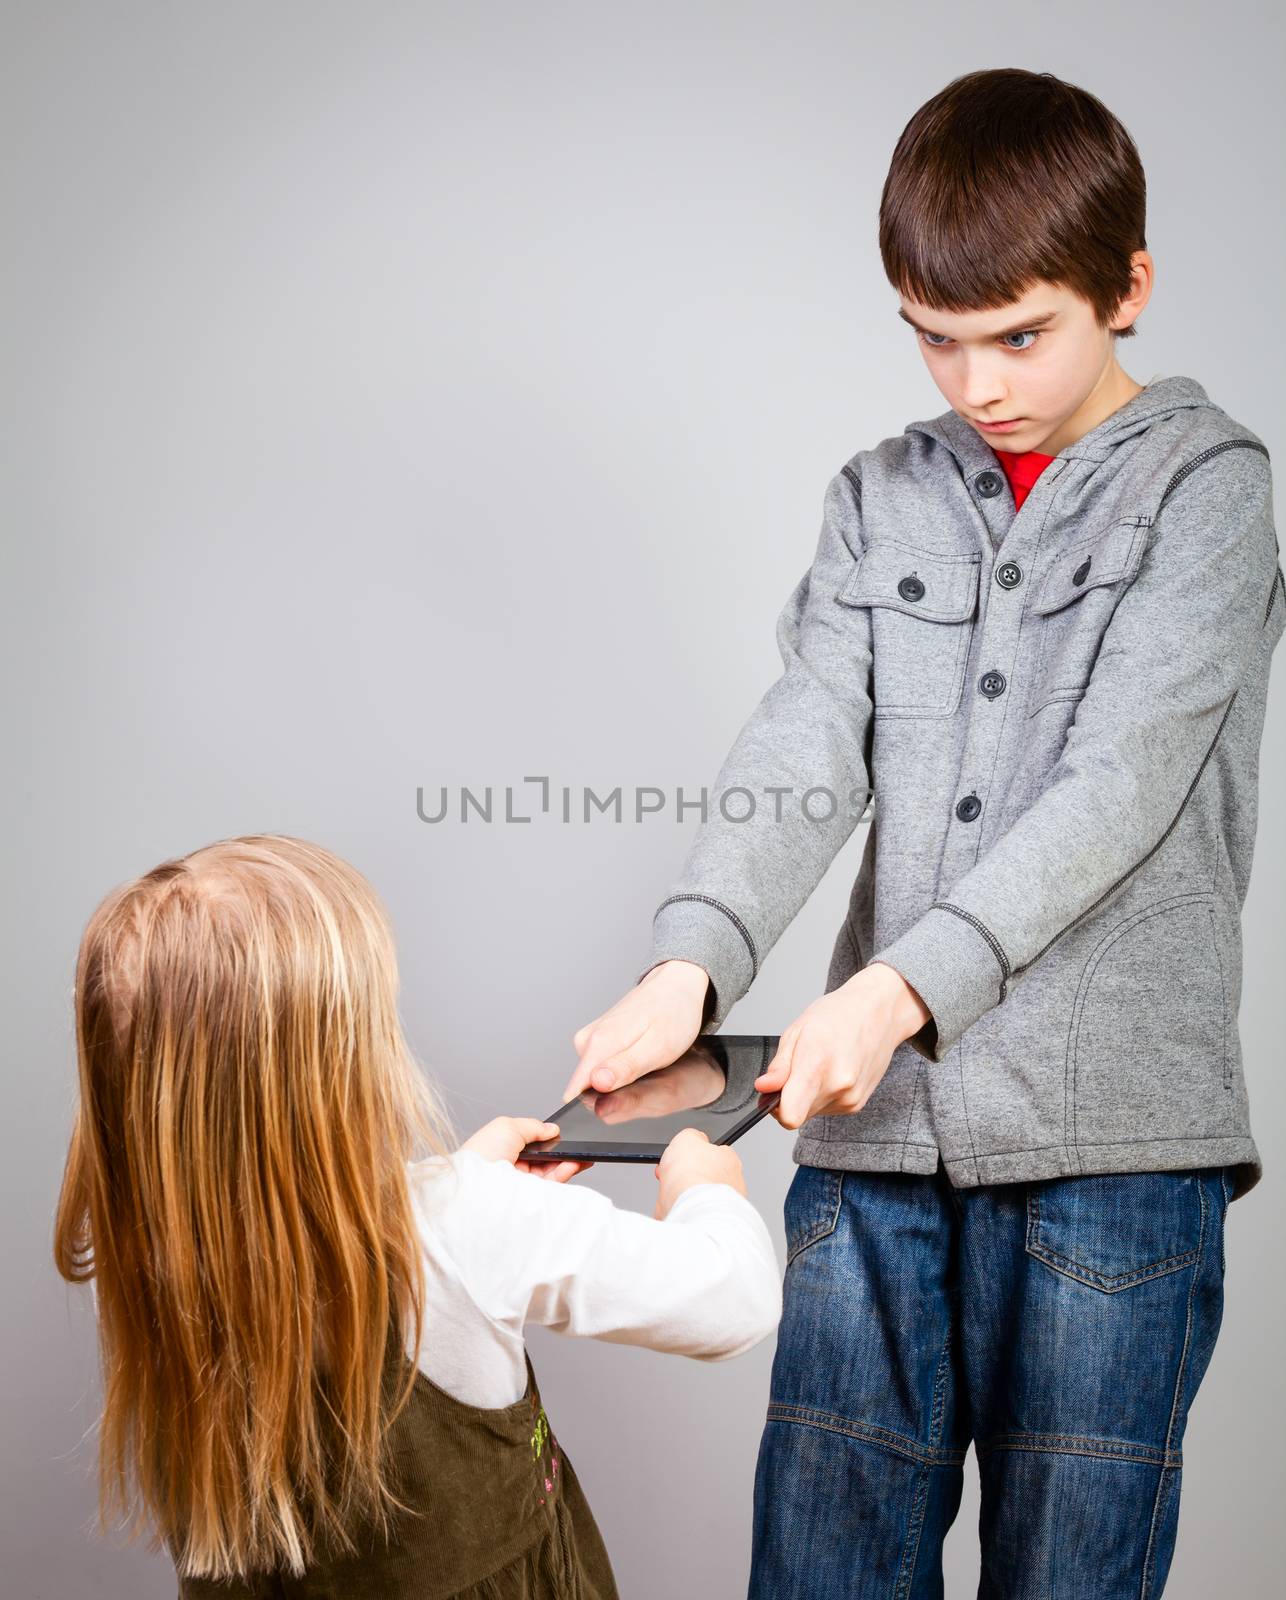 Children fight for tablet computer by naumoid